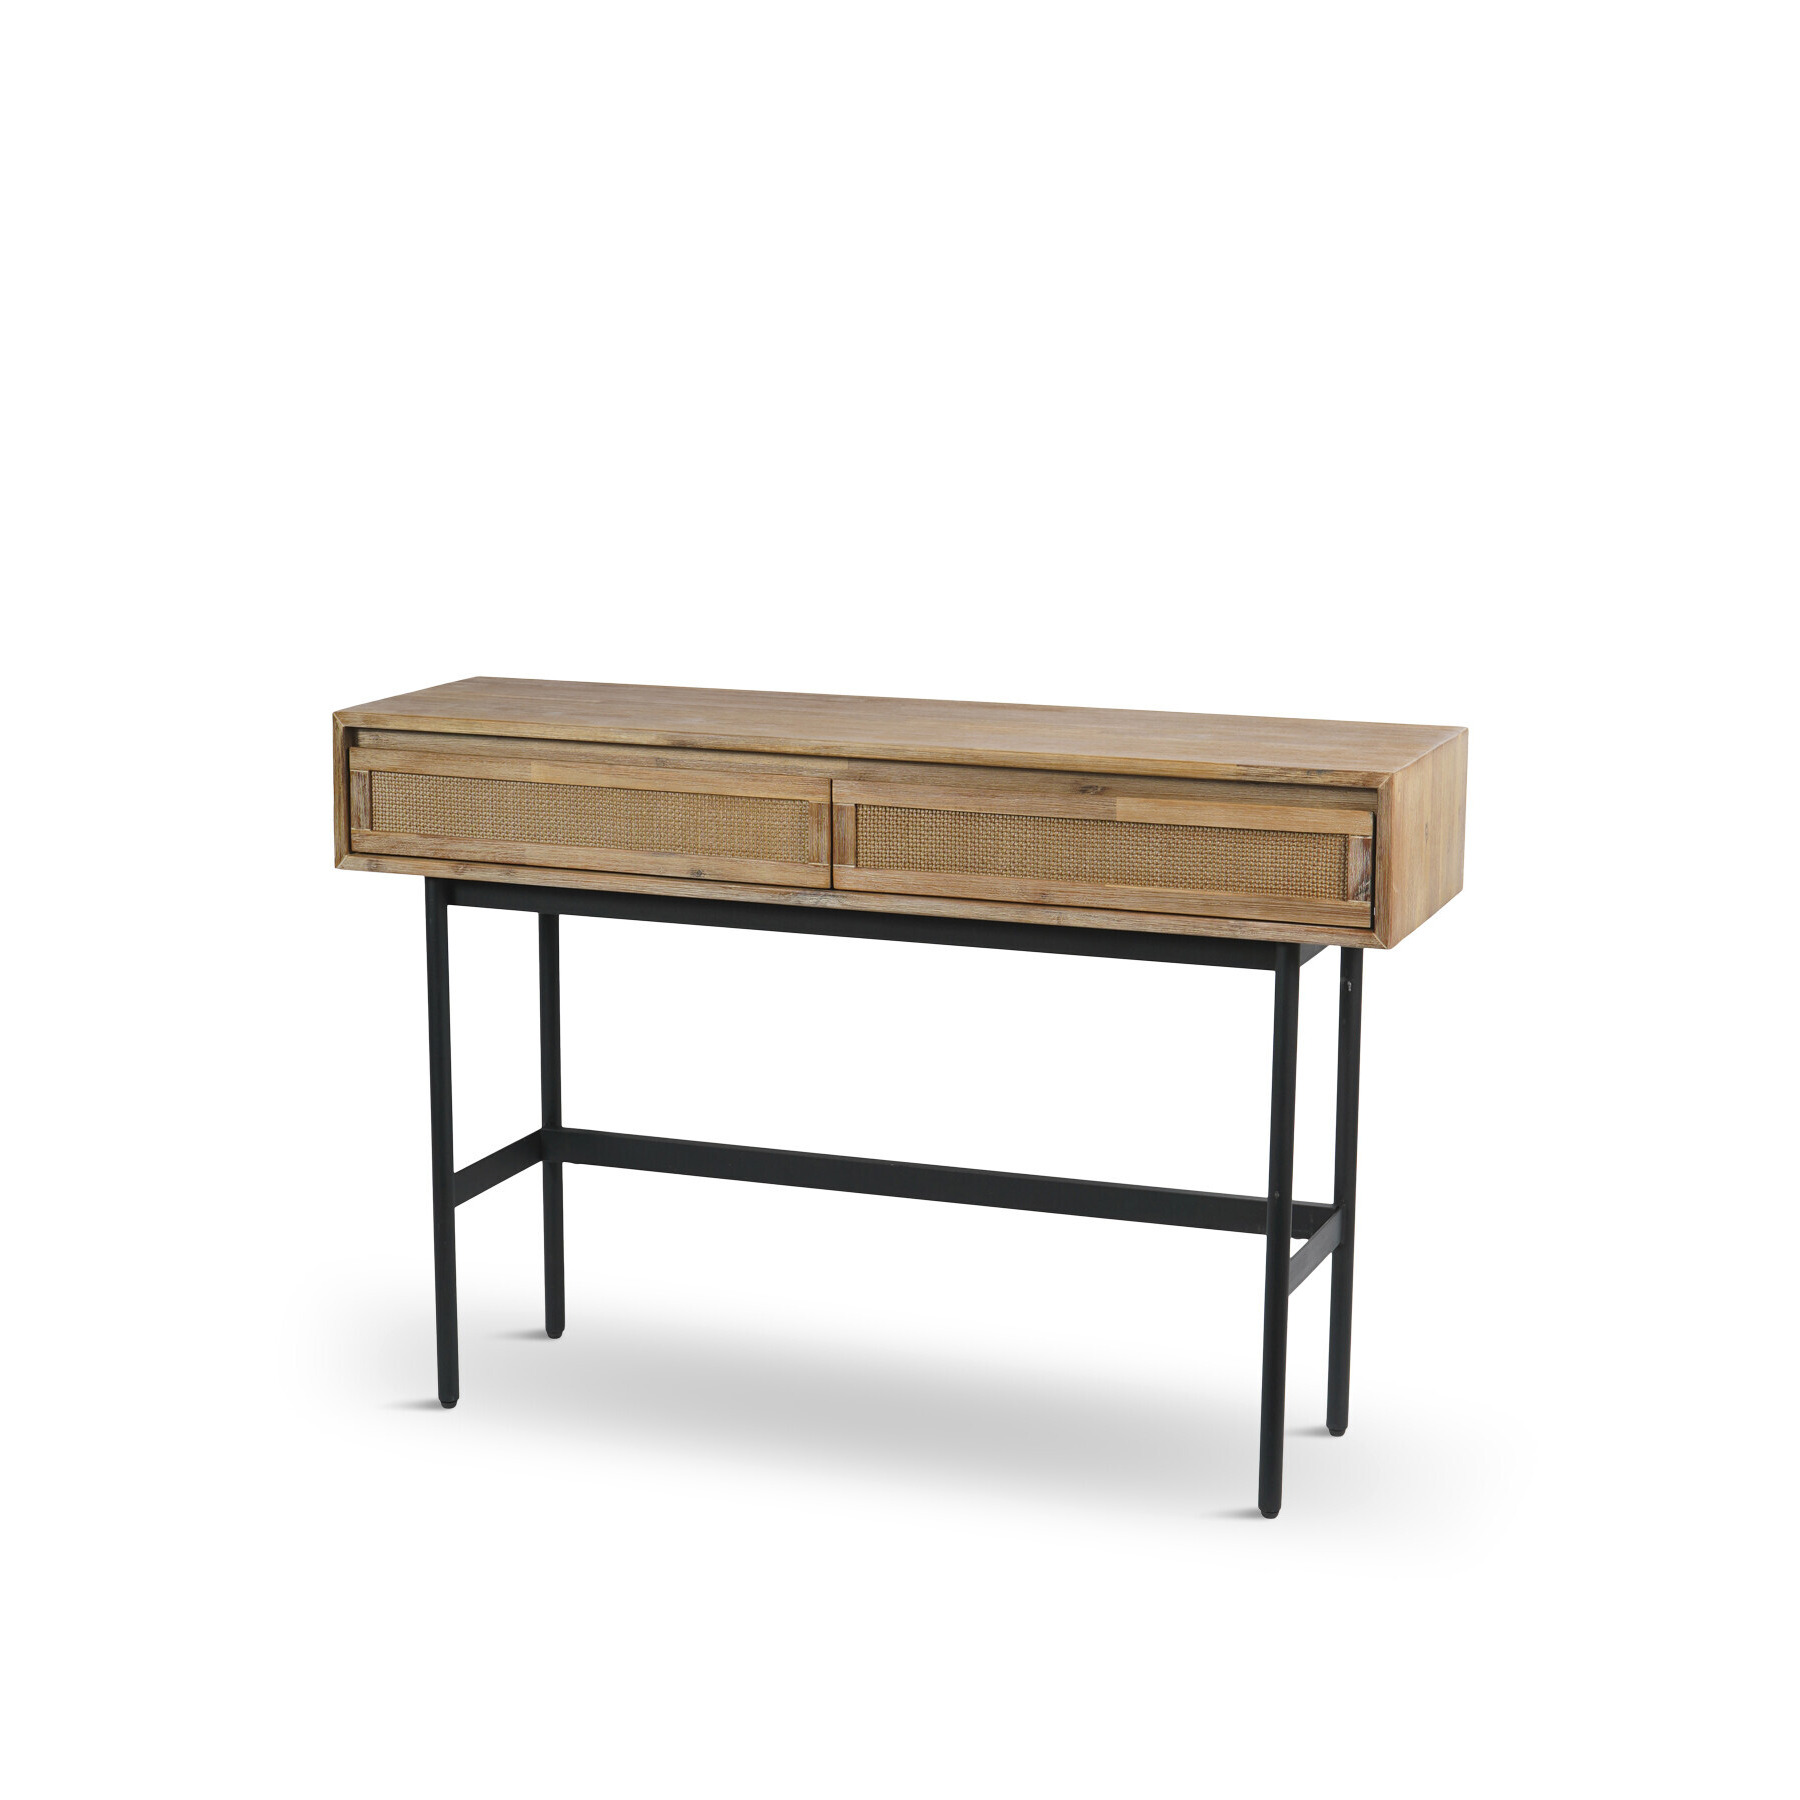 Libra Interiors Maddox Two Drawer Console Table - Size 120x35x80 Brown - image 1